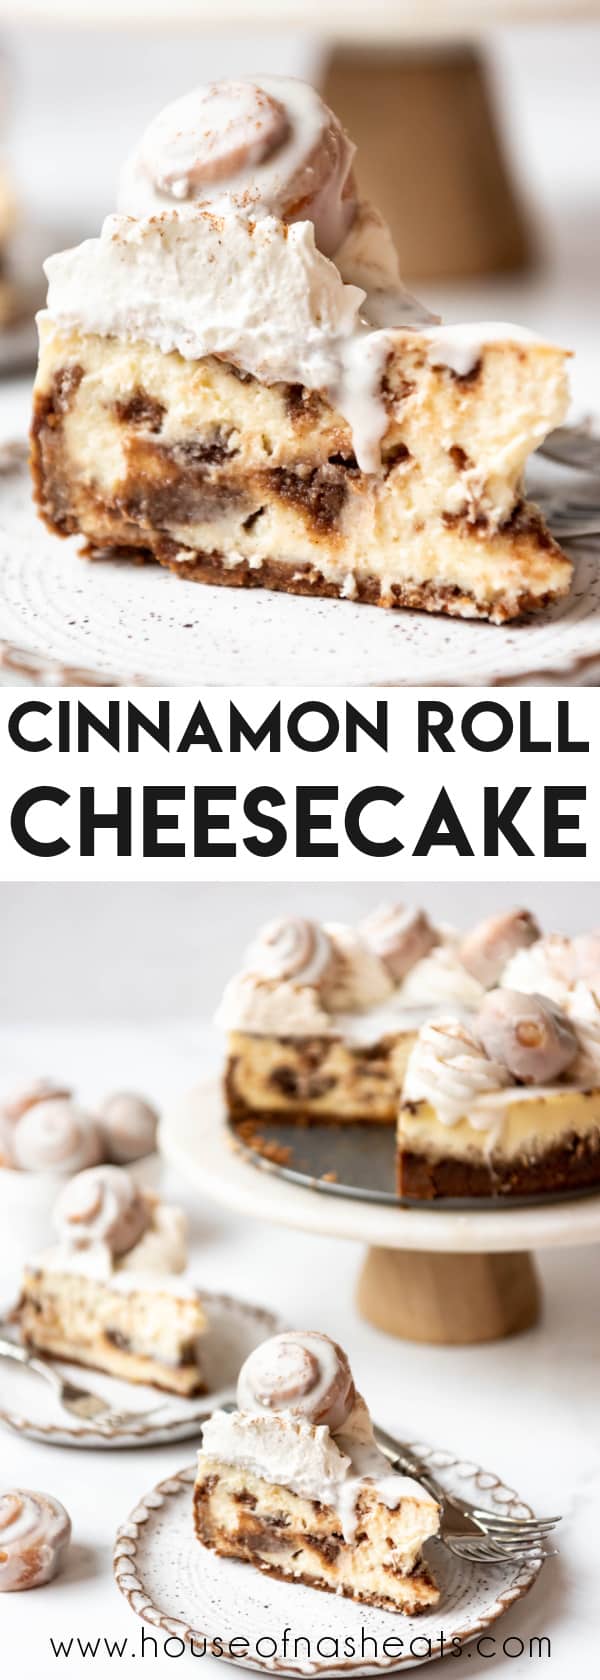 Images of cinnamon roll cheesecake with text overlay.